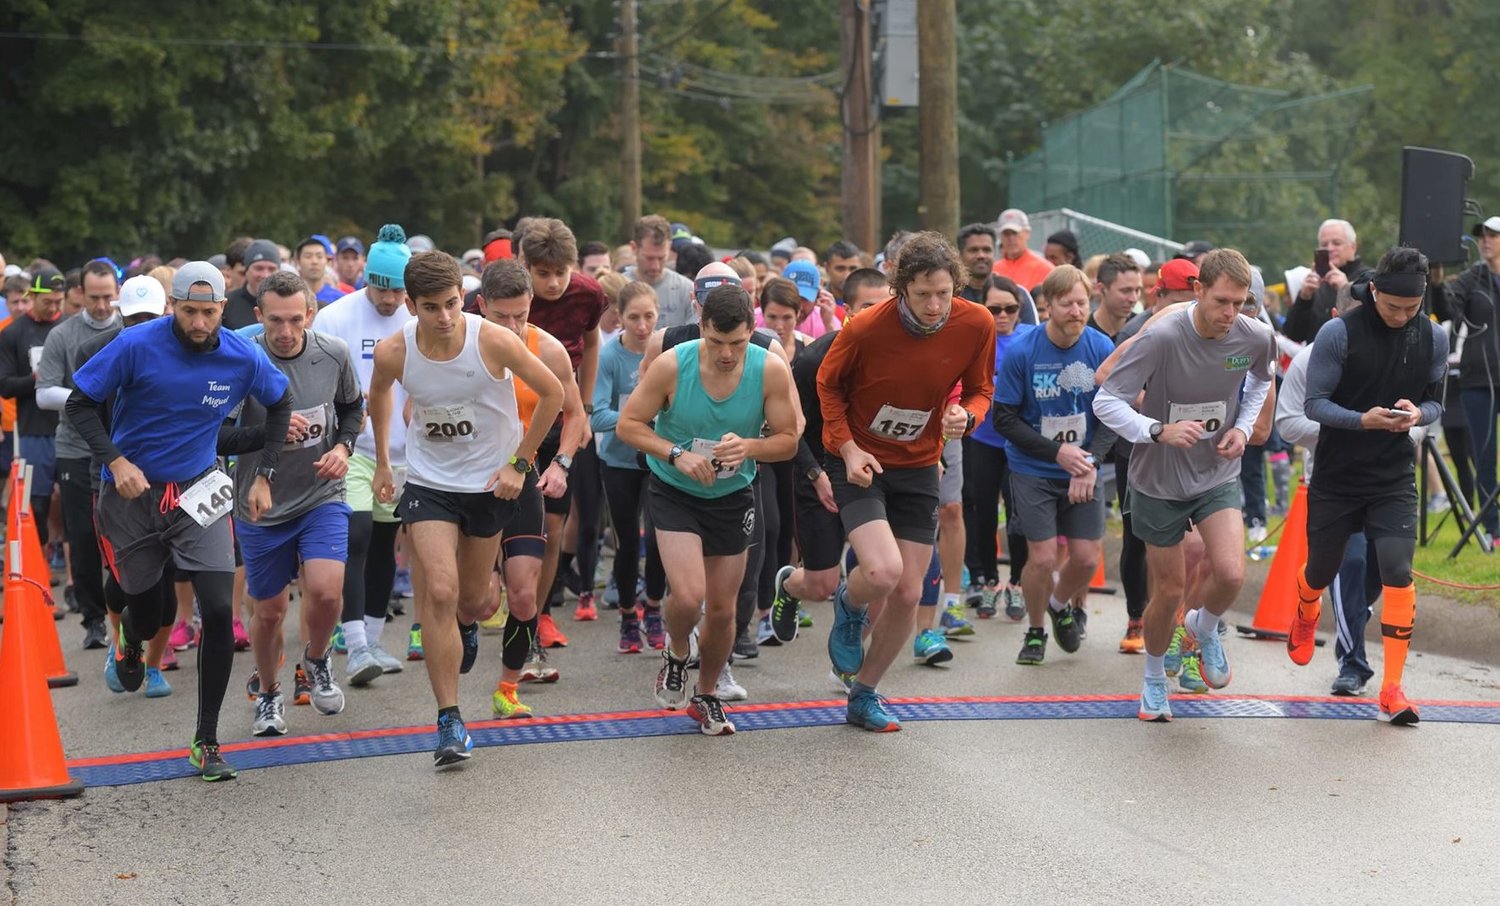 The Radnor Run is an outdoor in-person event, beginning at 7 a.m. Sunday, Oct. 30.